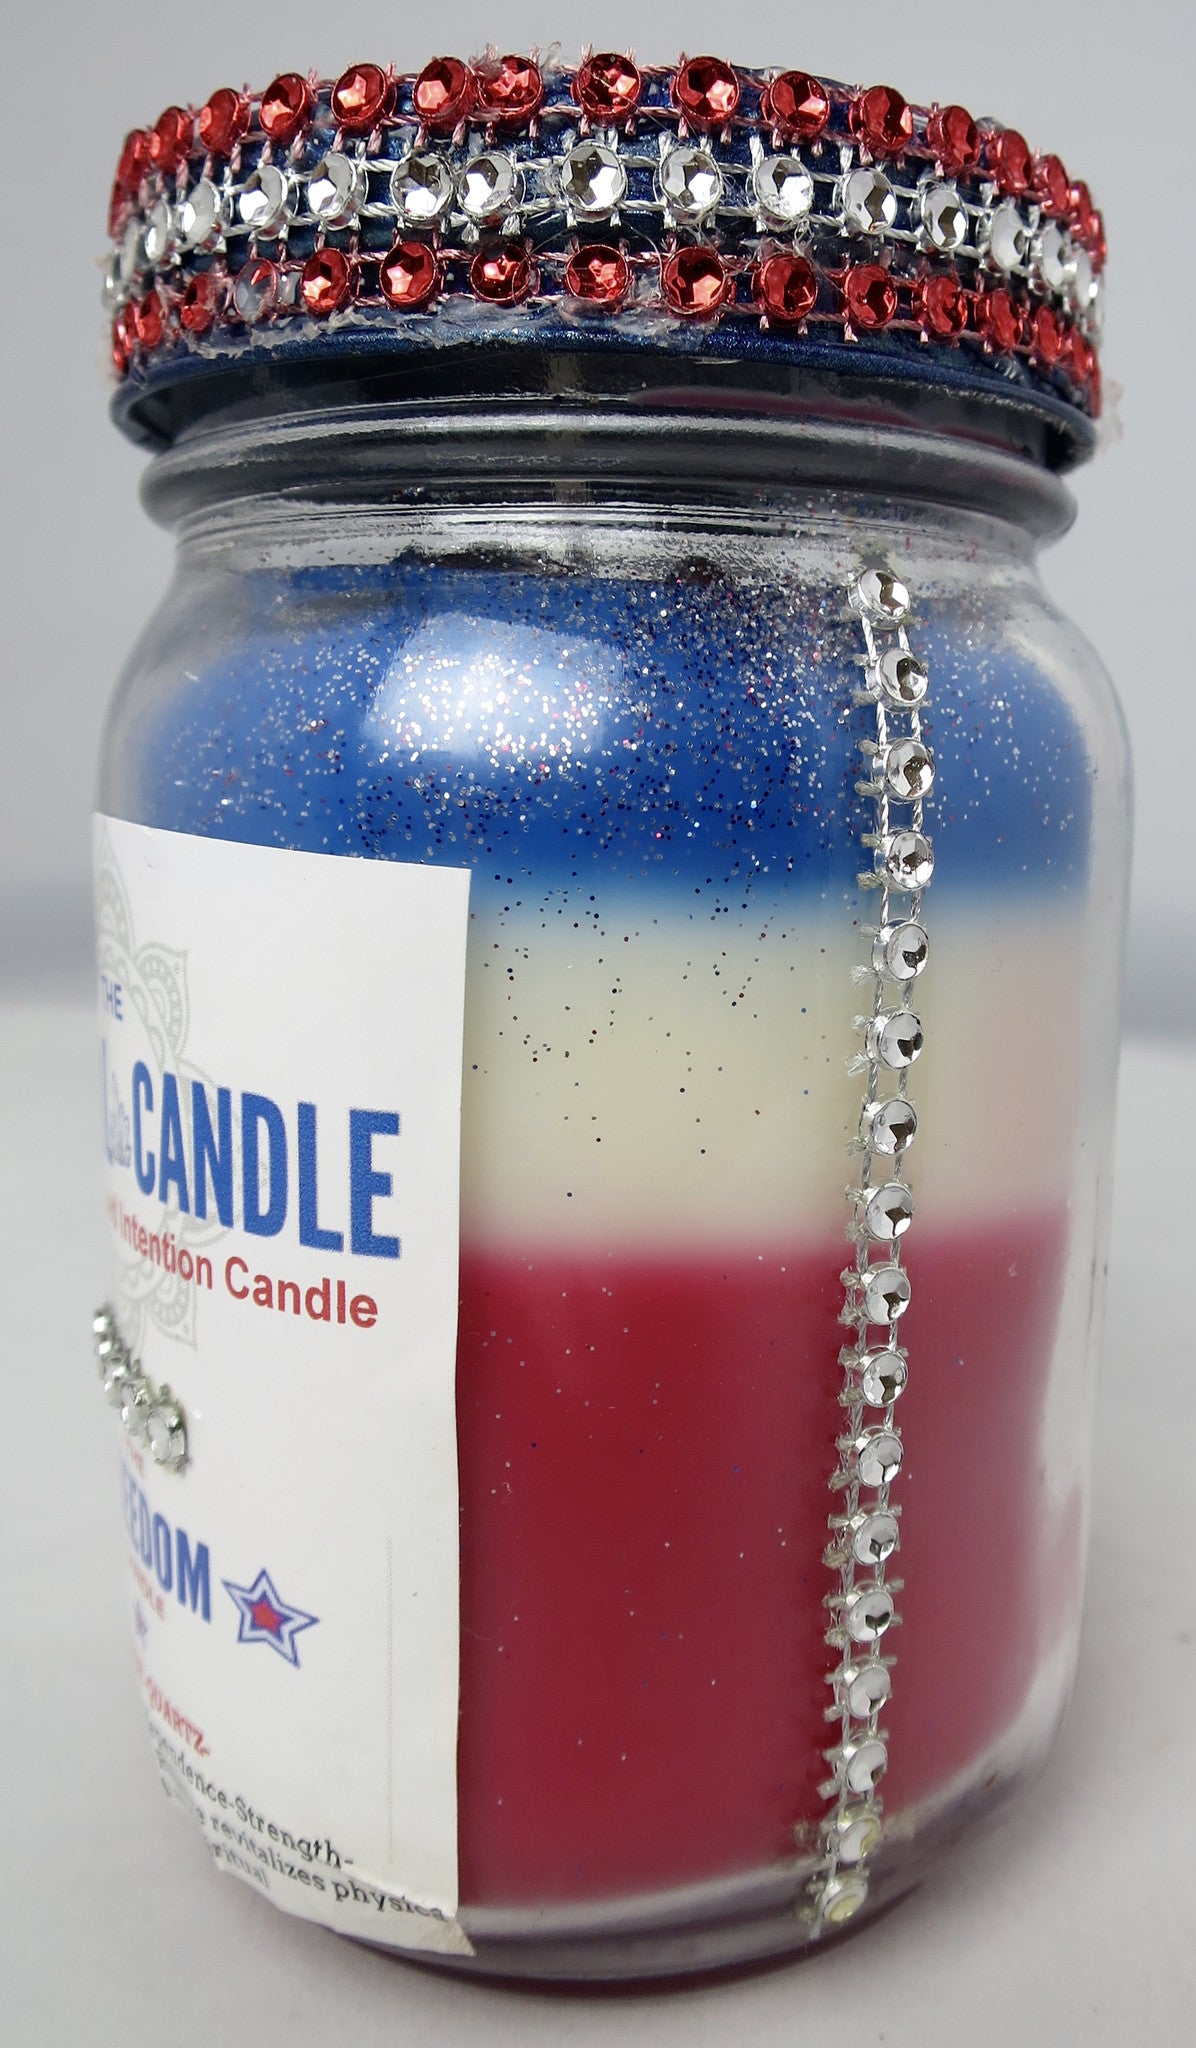 The Crystal Candle-The Freedom Candle